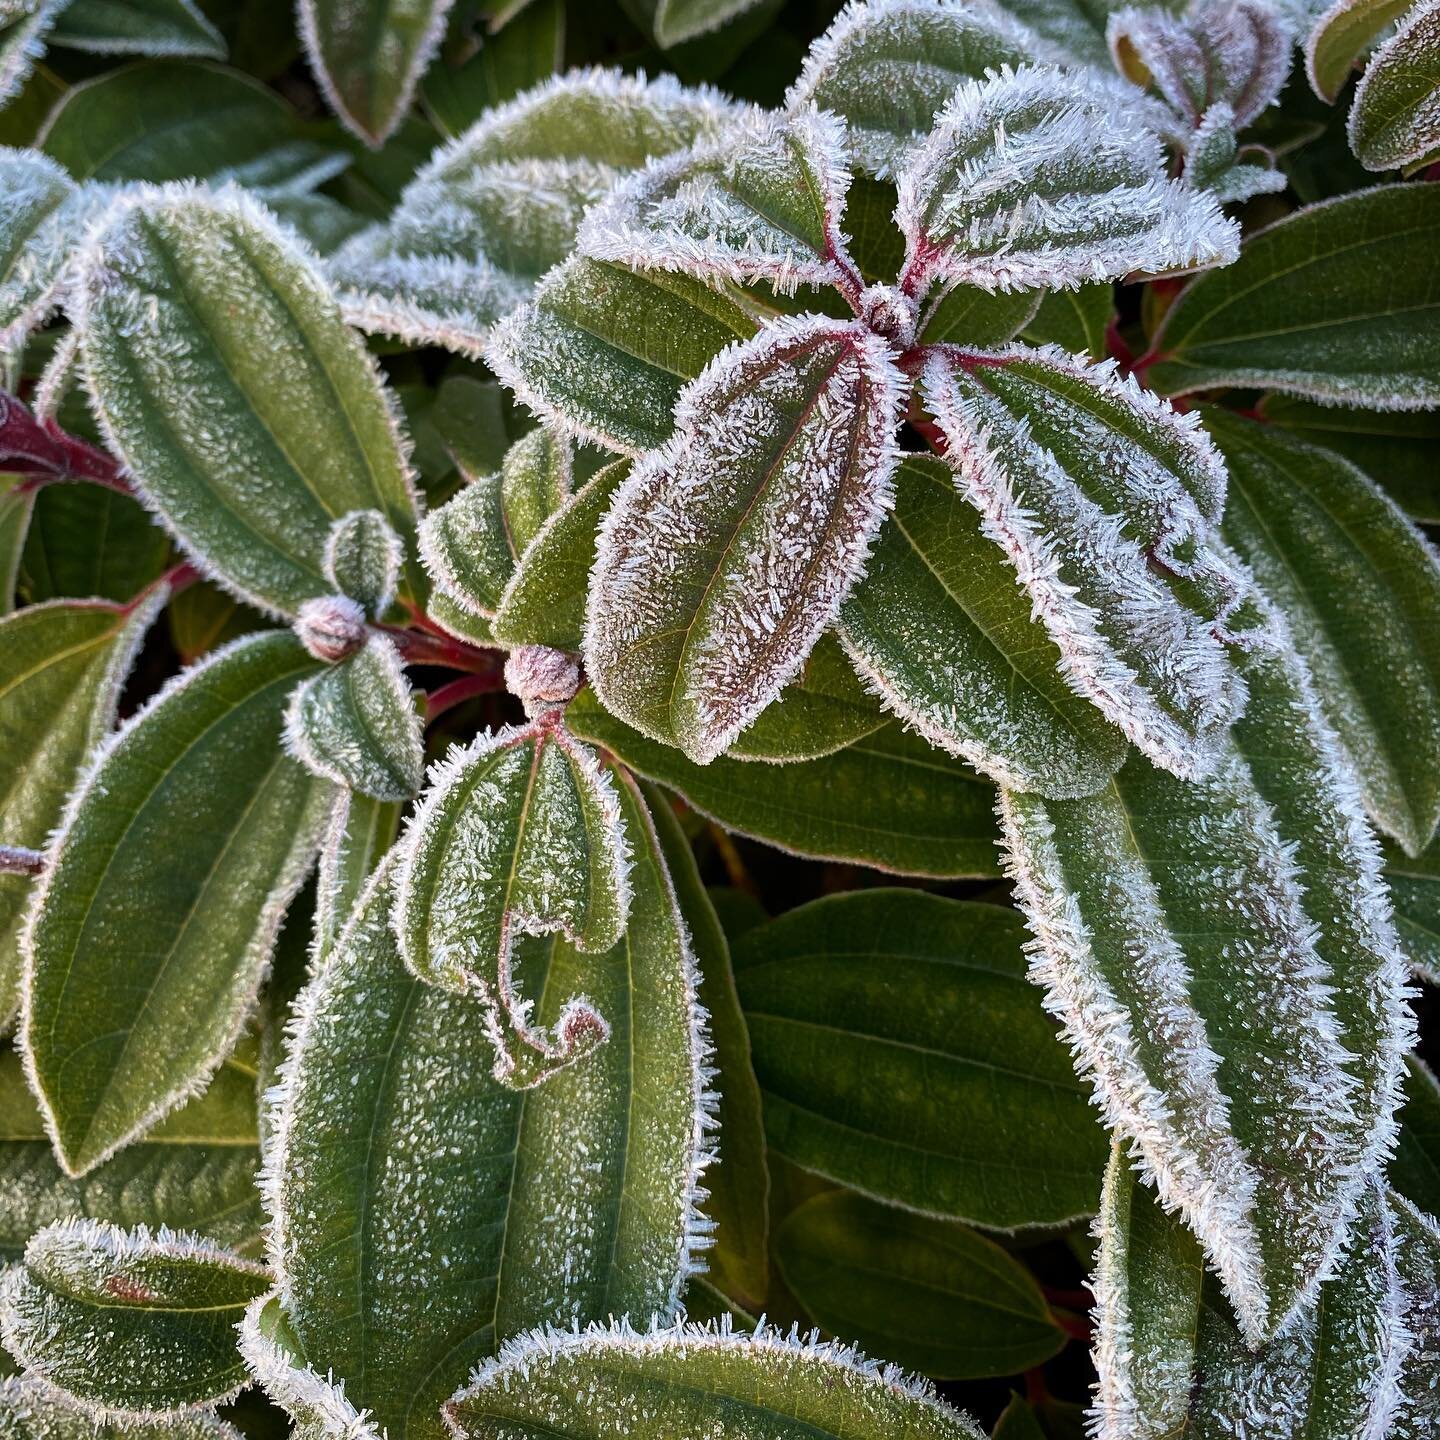 A frosty morning means I can&rsquo;t resist stopping every few feet on my walk to take pictures of plants.
&bull;
&bull;
&bull;
#latergram #frost #icecrystals #pnwonderland #december